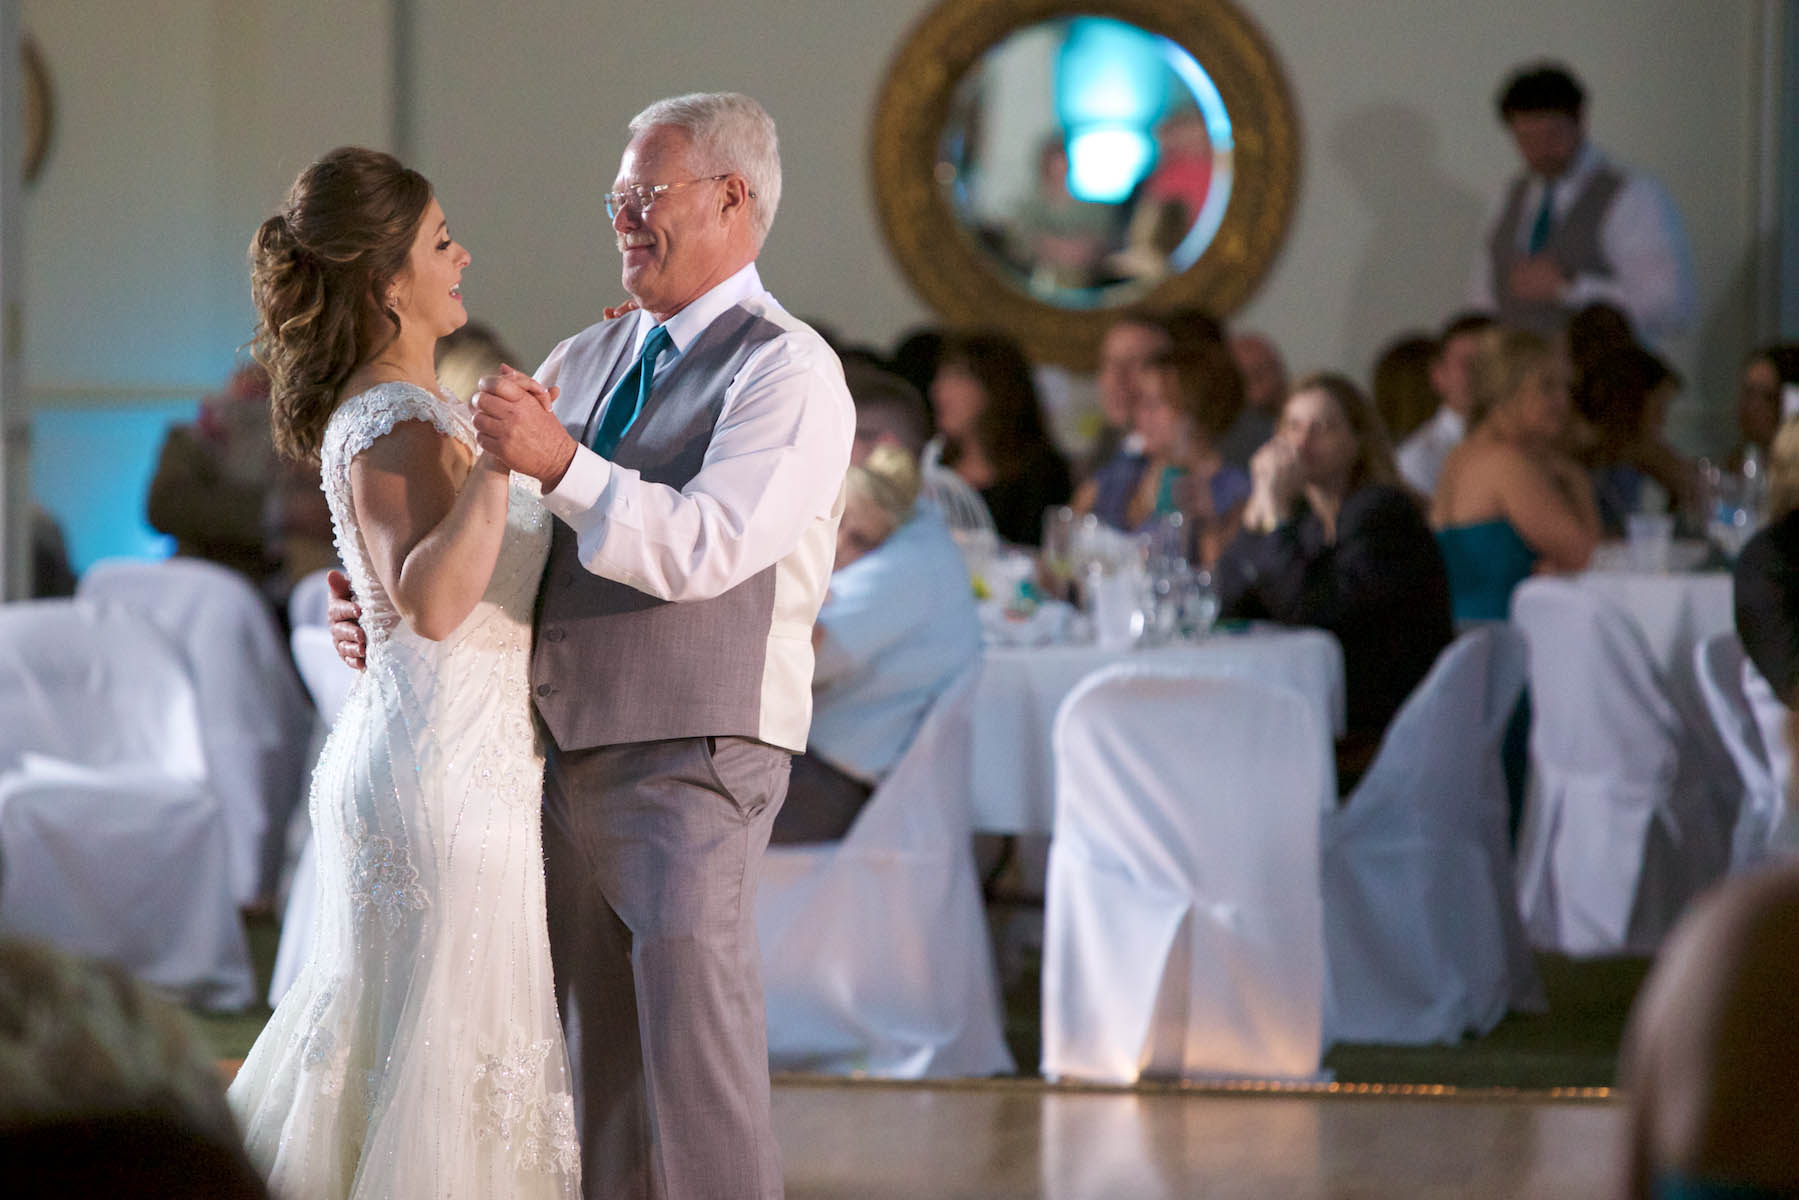 Alissa with her father during first dances. Wedding pictures by Tiffany & Steve of Warmowski Photography.